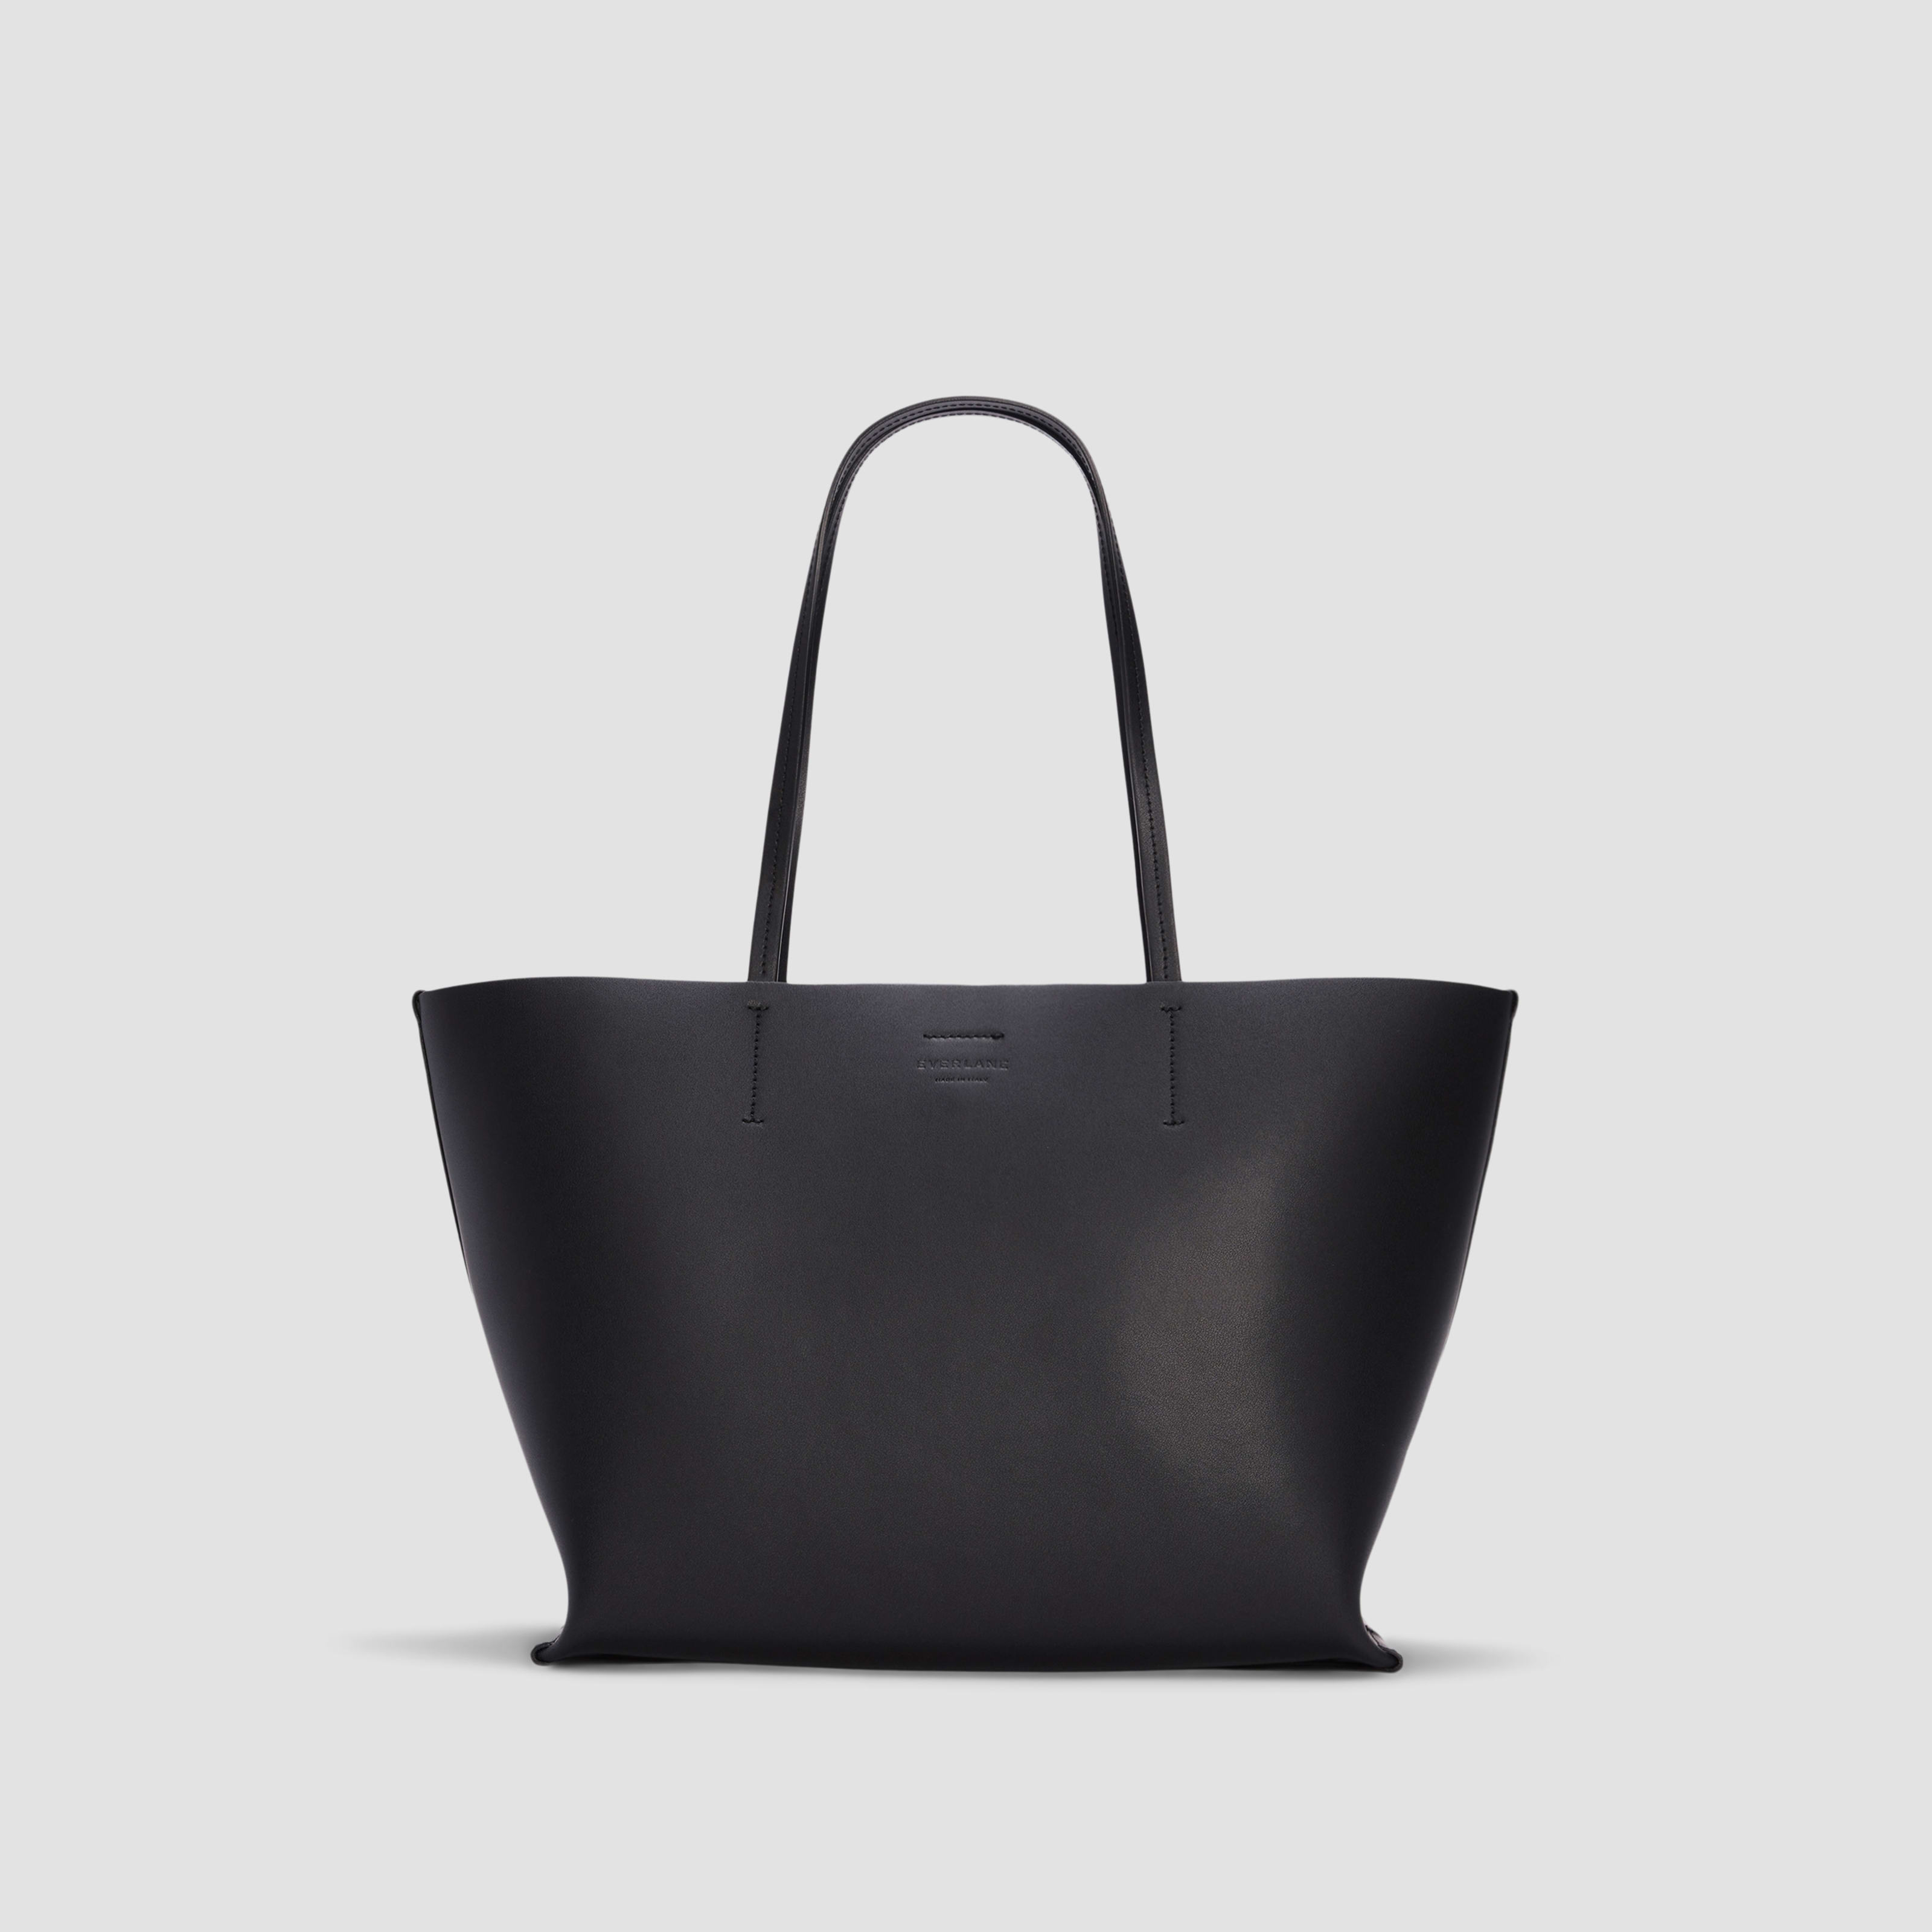 women's luxe medium italian leather tote bag by everlane in black